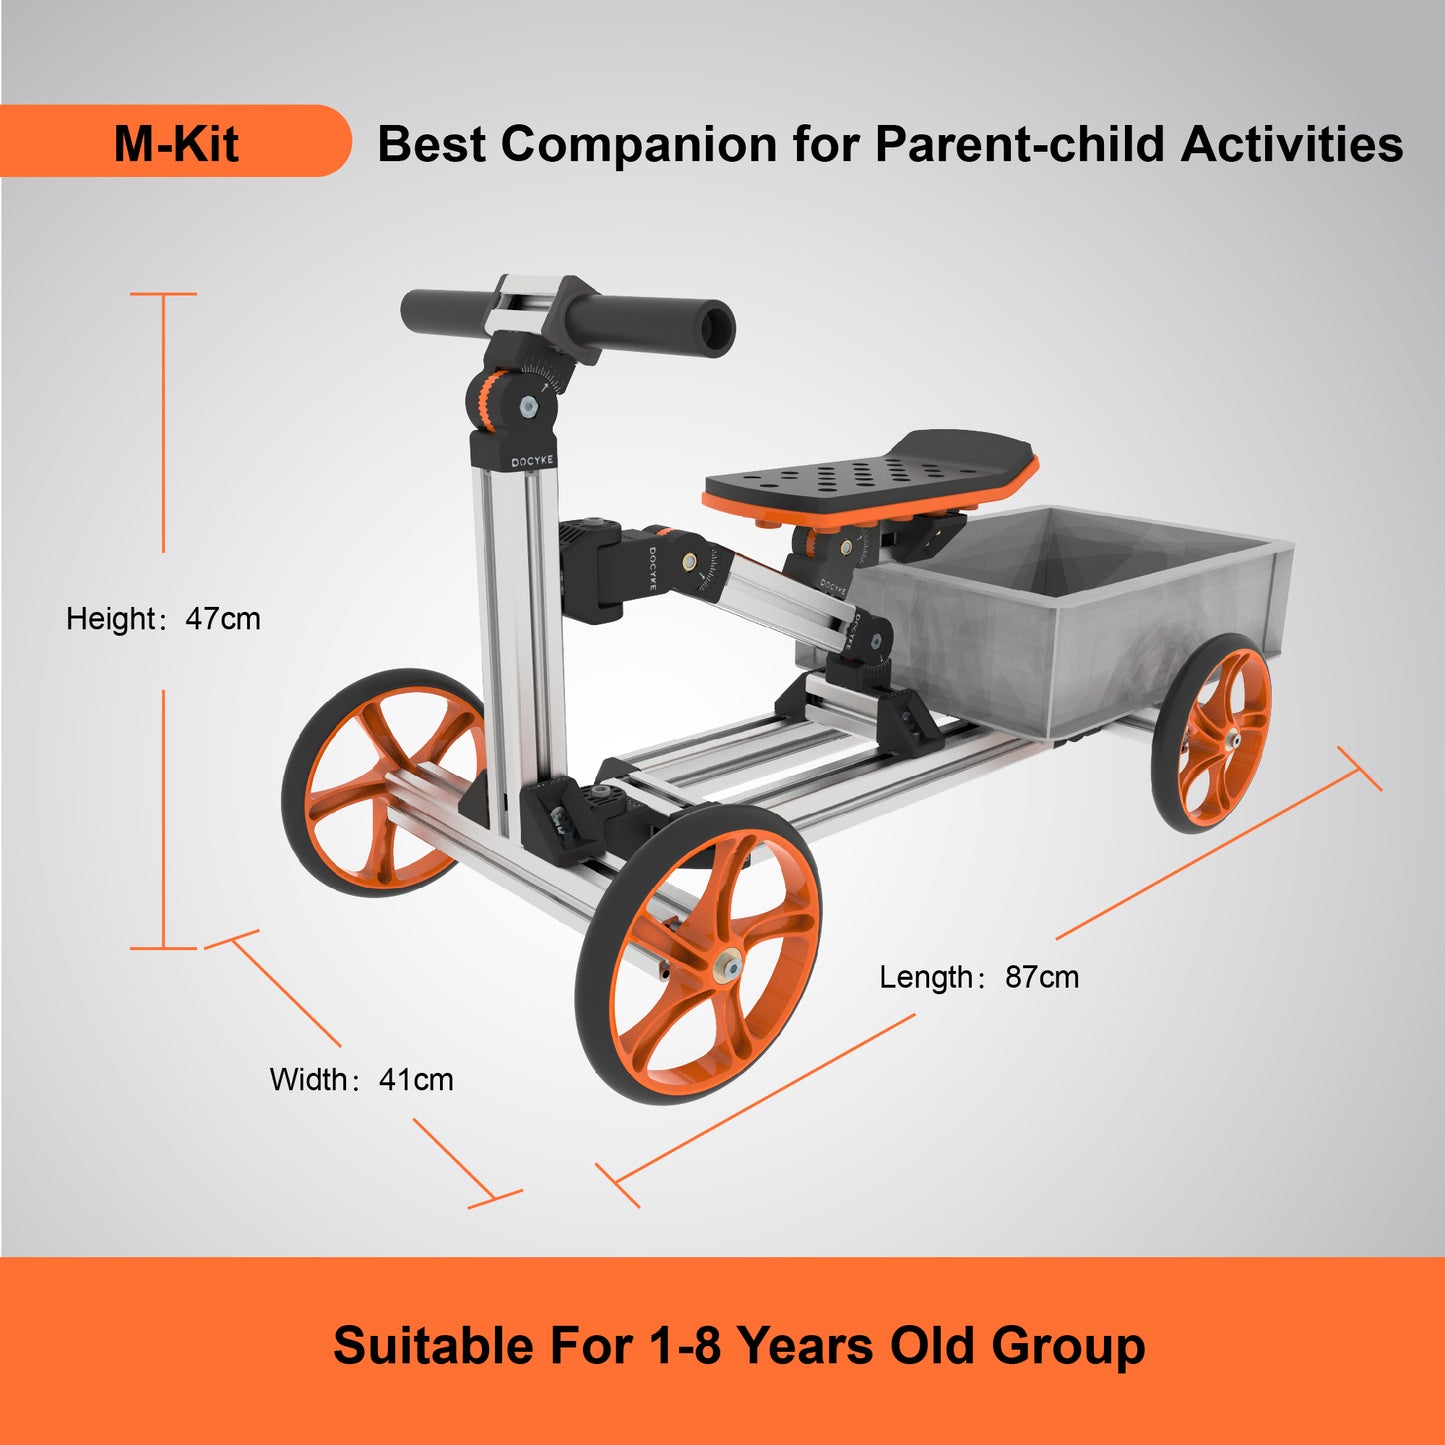 KidRock Buildable Kit 20 in 1 Kids Balance Bike No Pedal Toy for 1 to 6 Years Construction Construction Kit Kids Sit/Stand Scooter Most Popular M Kit (Non Electric)